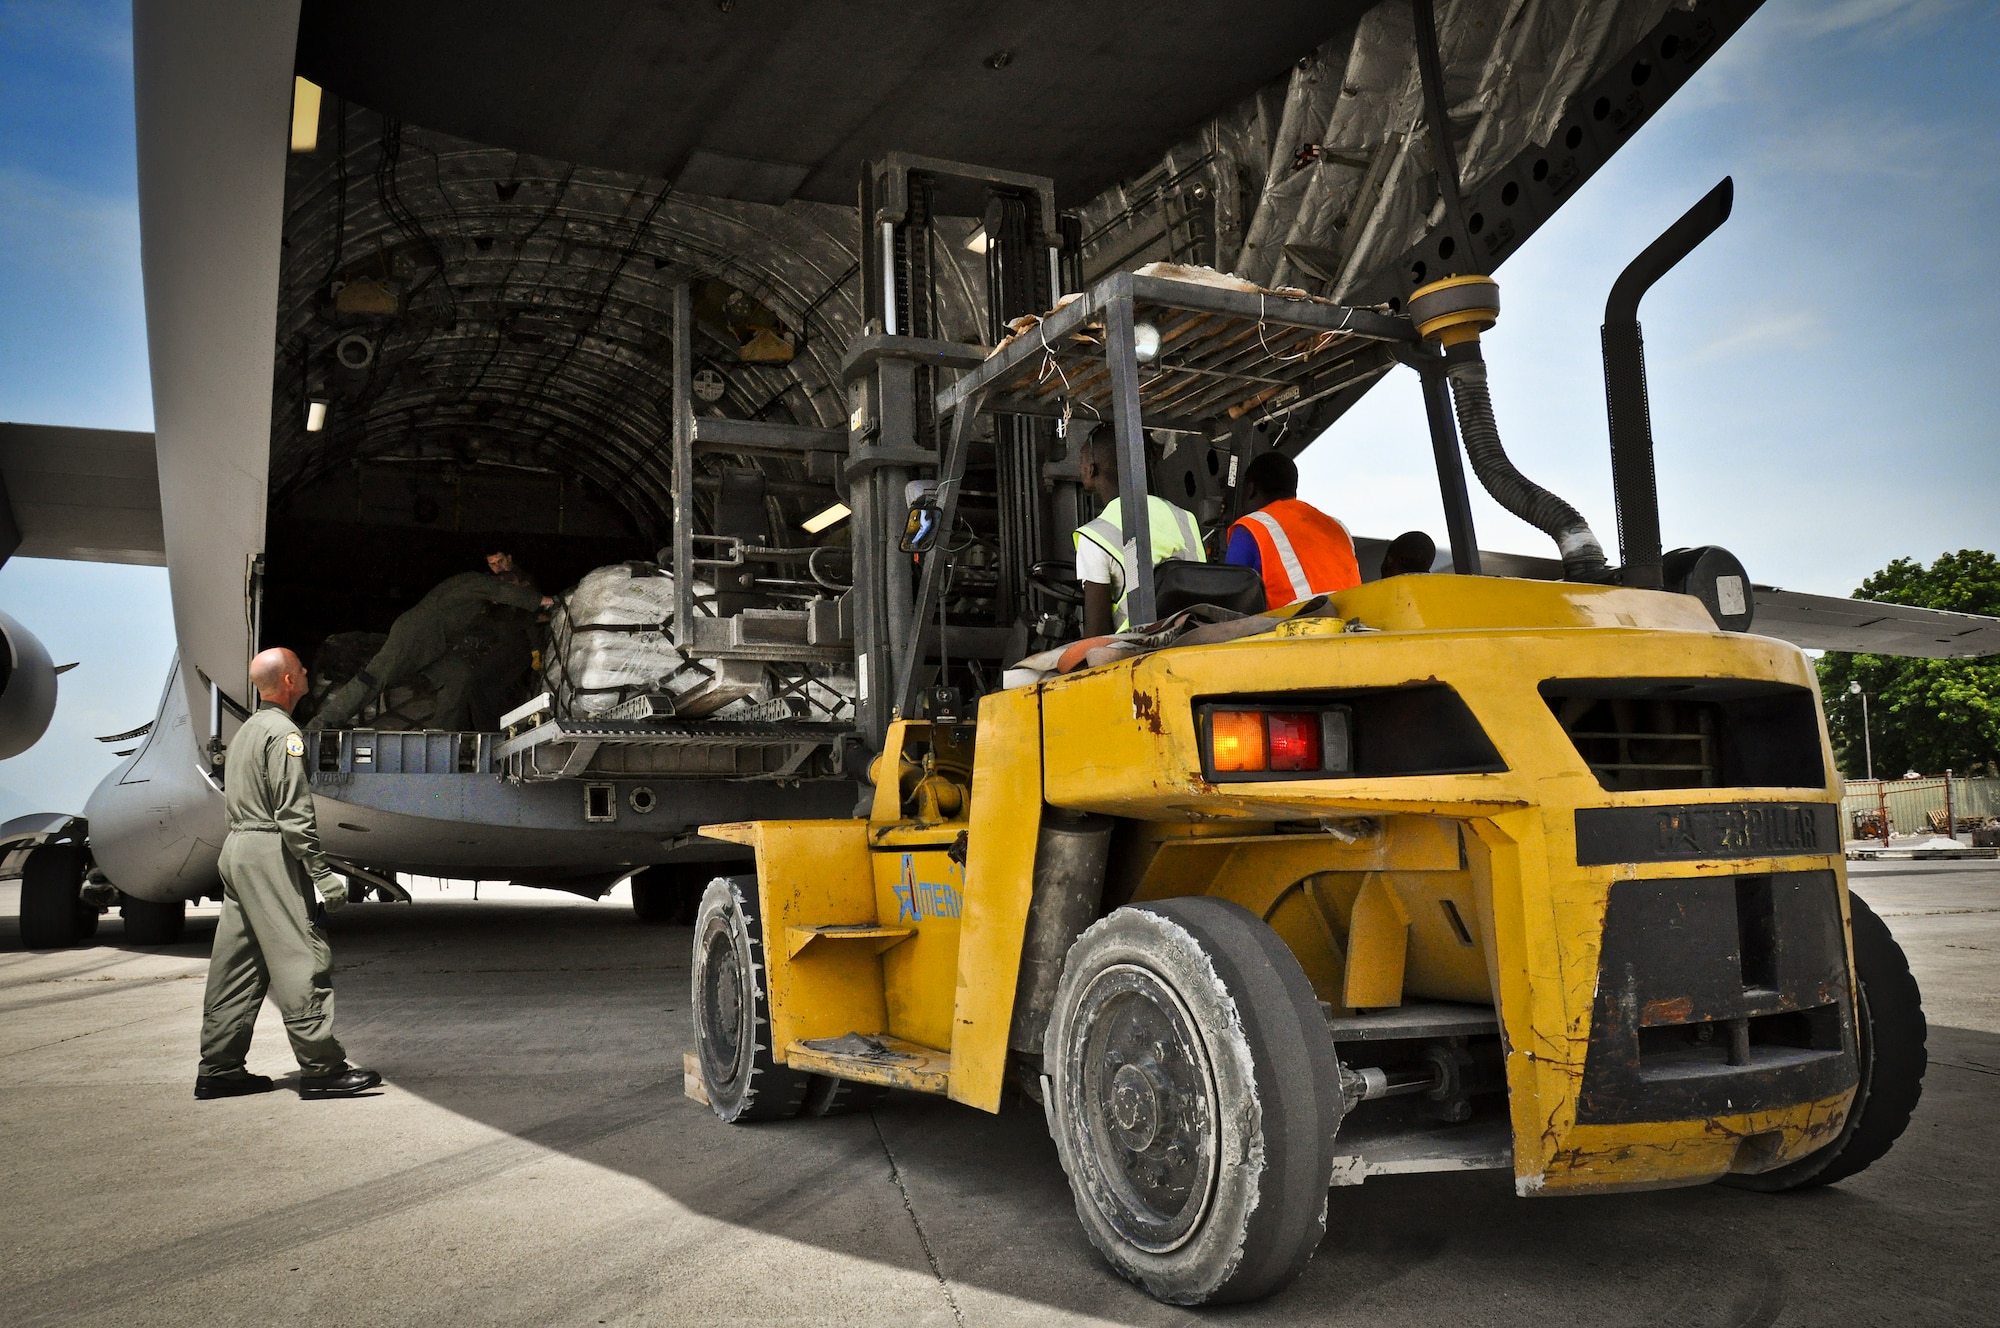 Technical Sergeant Arrin Baker of 300th Airlift Squadron checks the verticle clearance of a forklift during a humanitarian aid download in Haiti on July 1, 2011. (U.S. Air Force Photo/SSgt. Rashard Coaxum) 